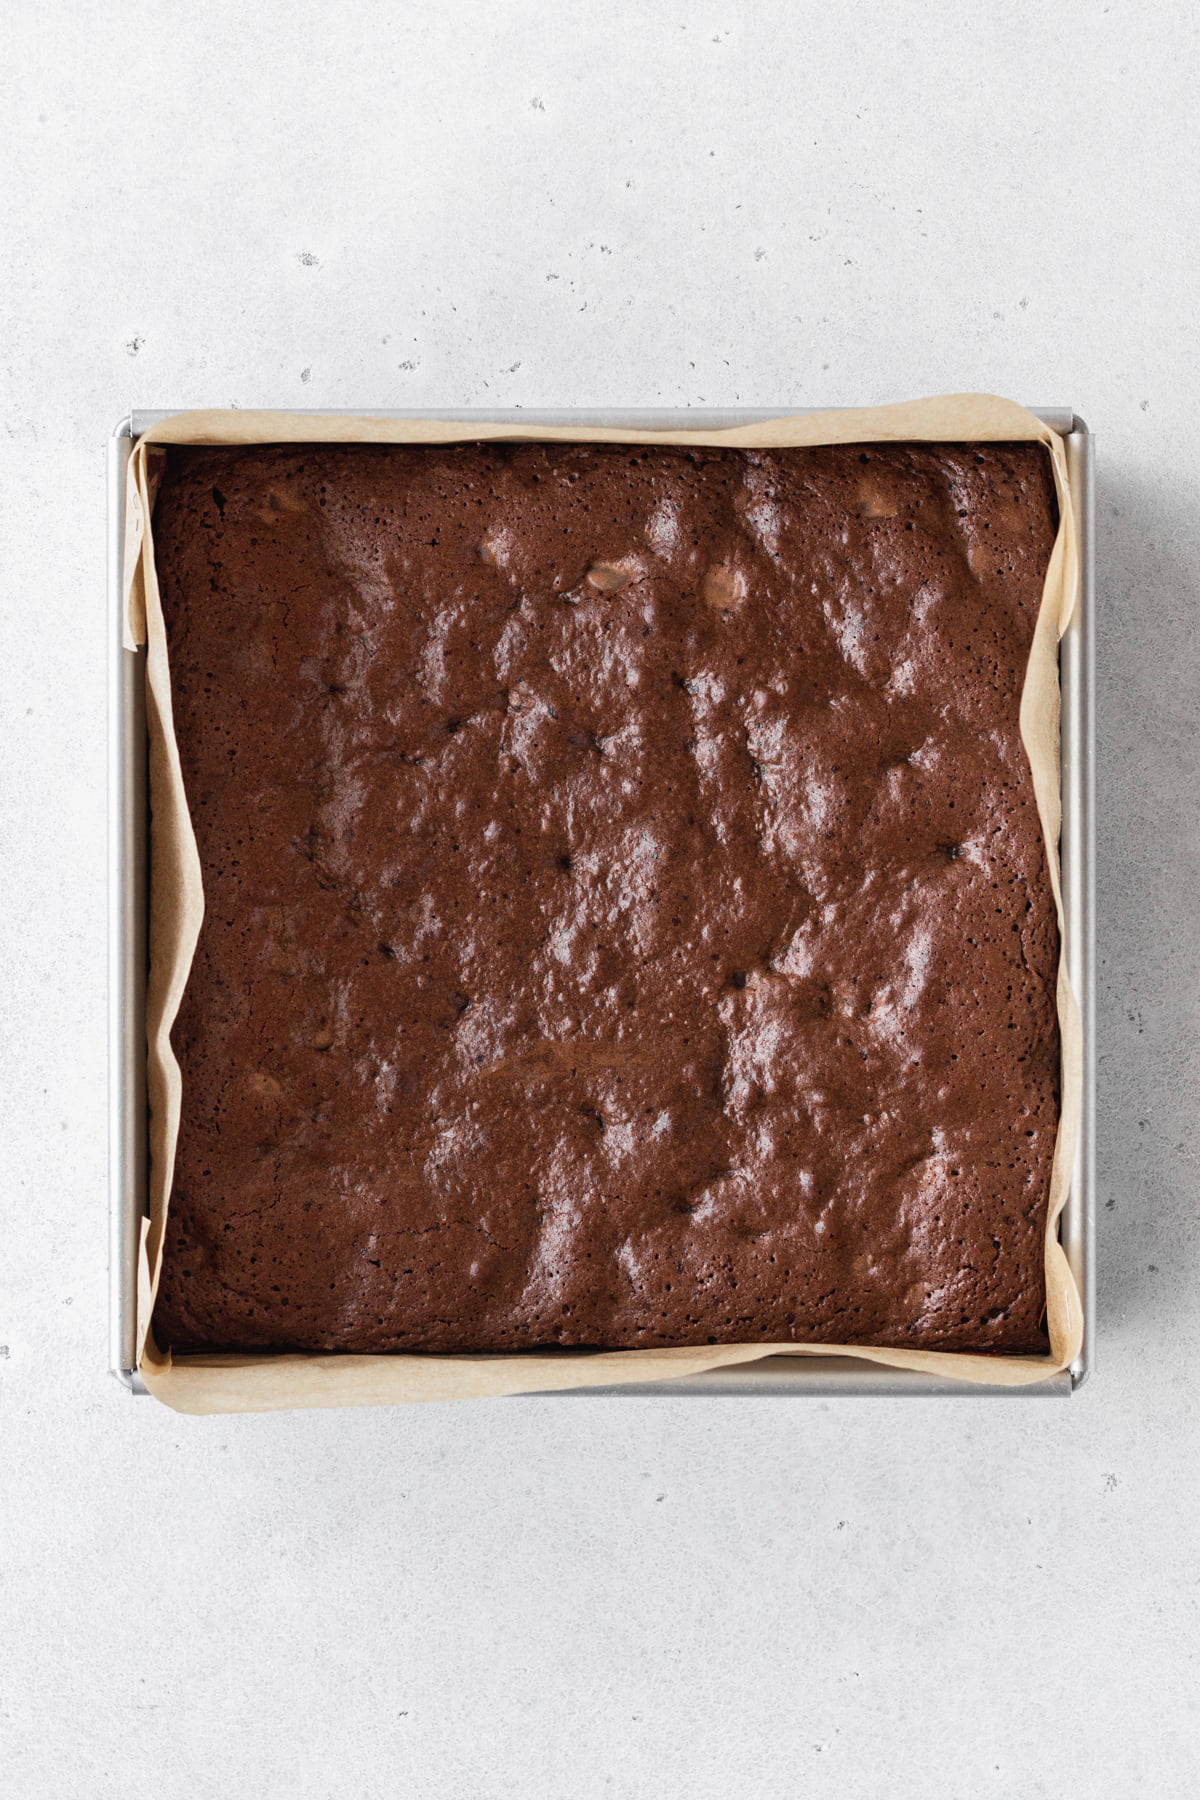 Gluten-free brownies after baking and still in the pan.